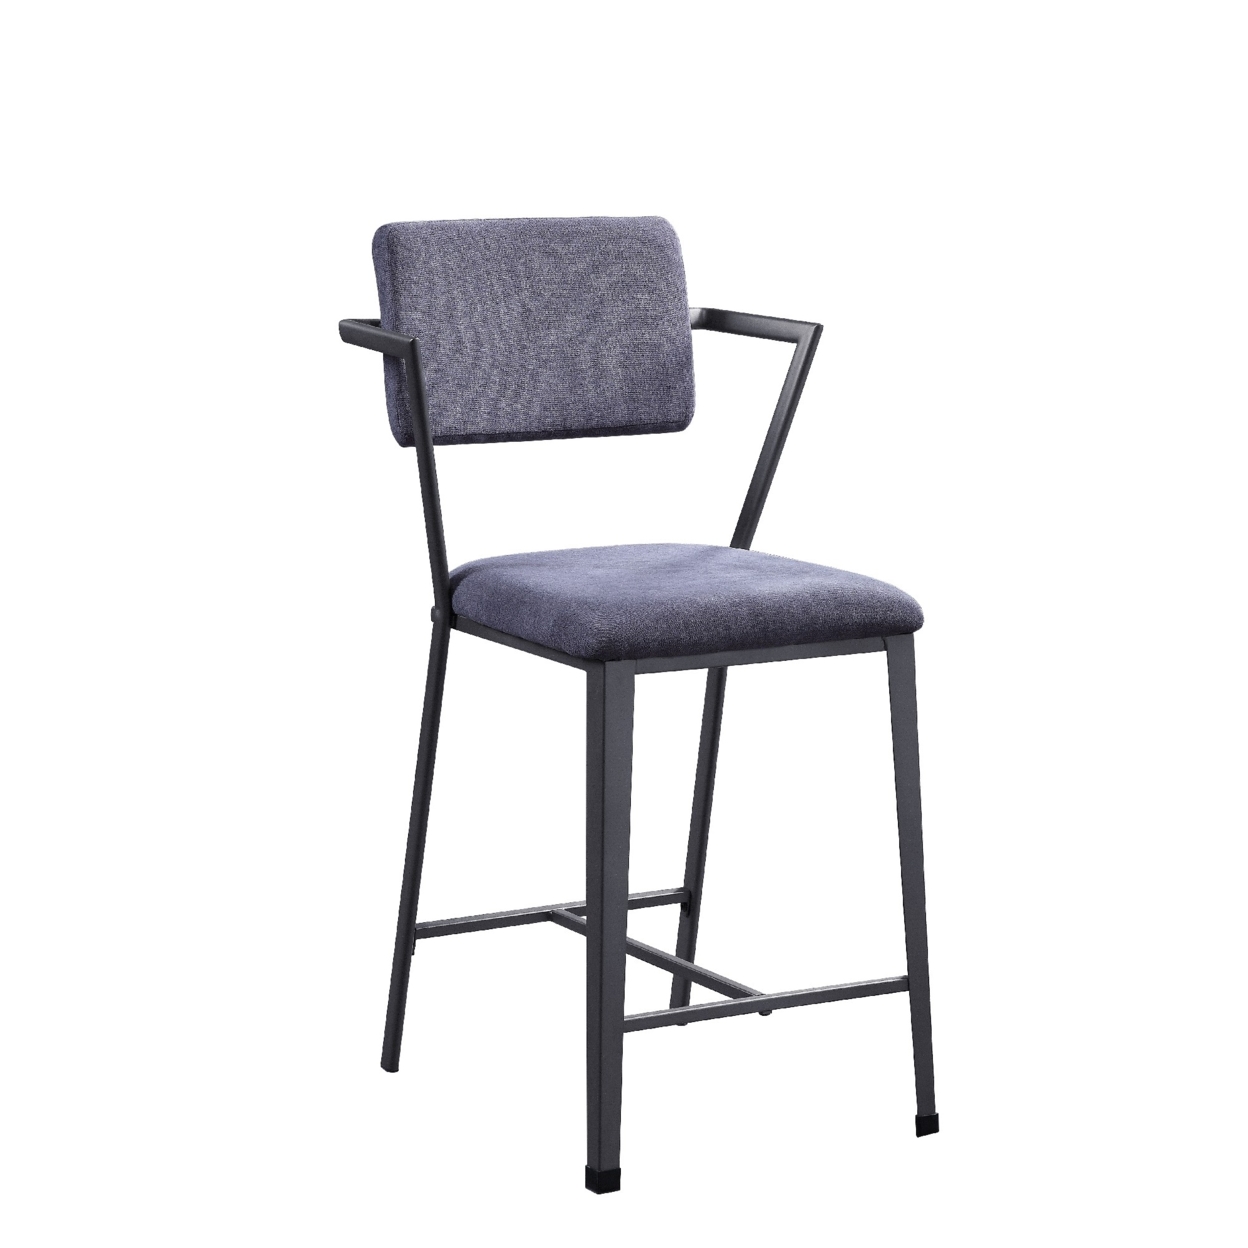 Fabric Upholstered Metal Counter Height Chair, Set Of 2,Gray And Black- Saltoro Sherpi